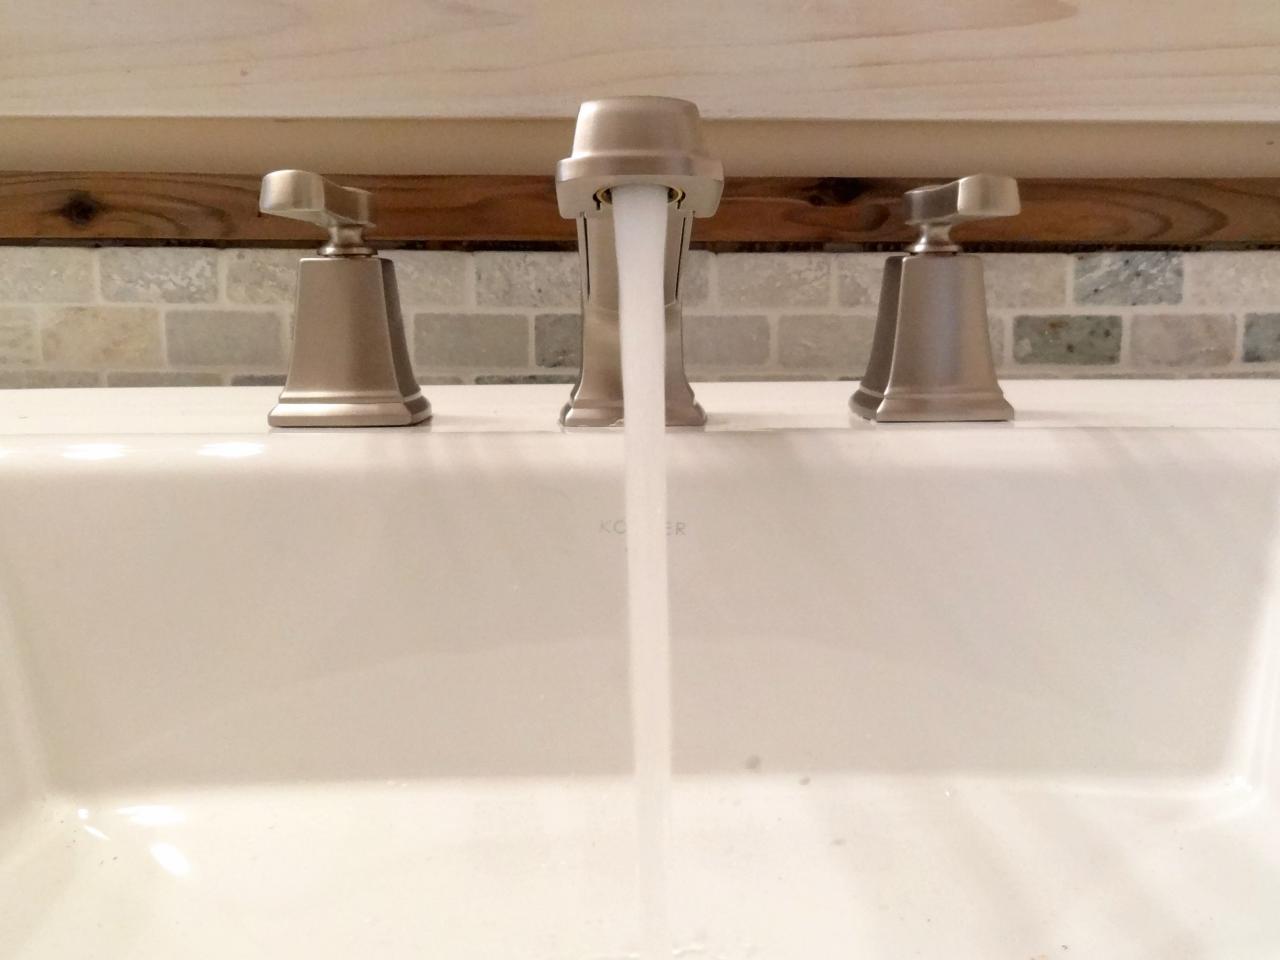 How To Replace A Bathroom Faucet, Installing A Bathtub Faucet Stem